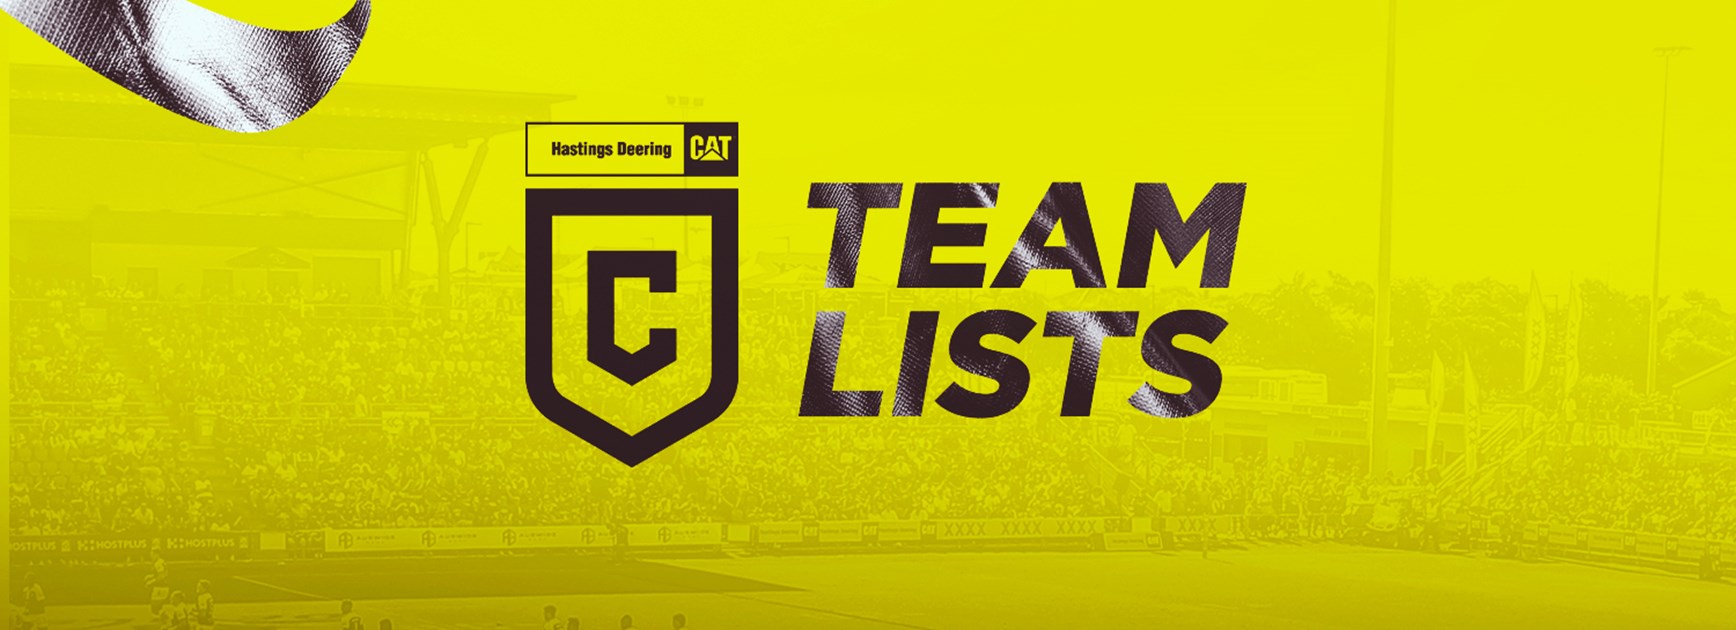 Round 13 Hastings Deering Colts team lists